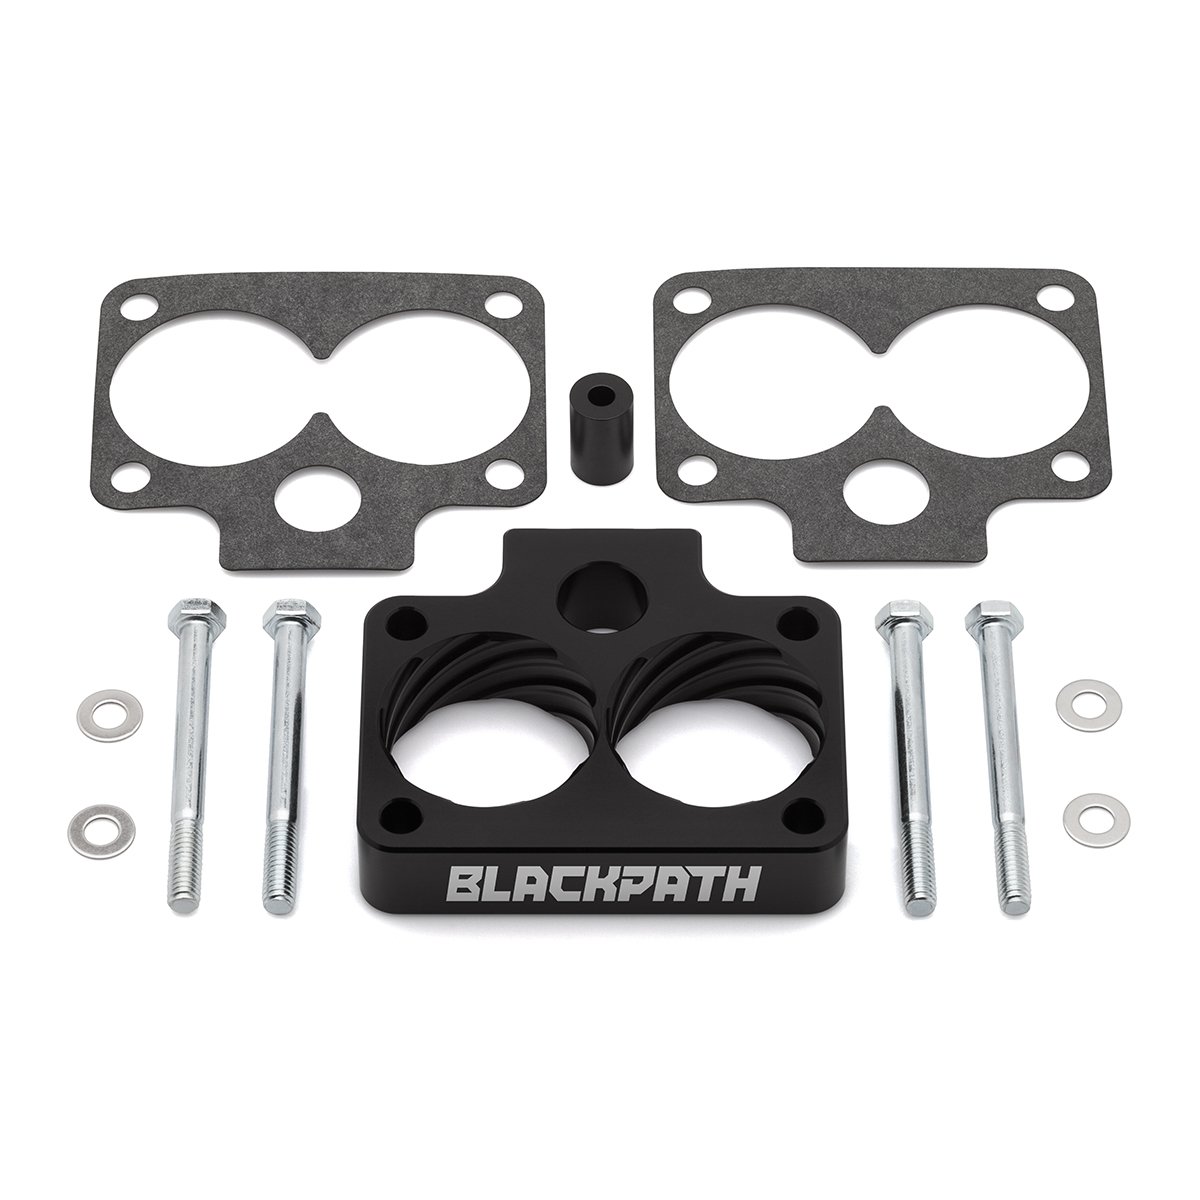 Throttle Body Spacer Anodized Black For 94-01 Dodge Ram 1500 2500 3.9L Ram 1500 Throttle Body Spacer Worth It